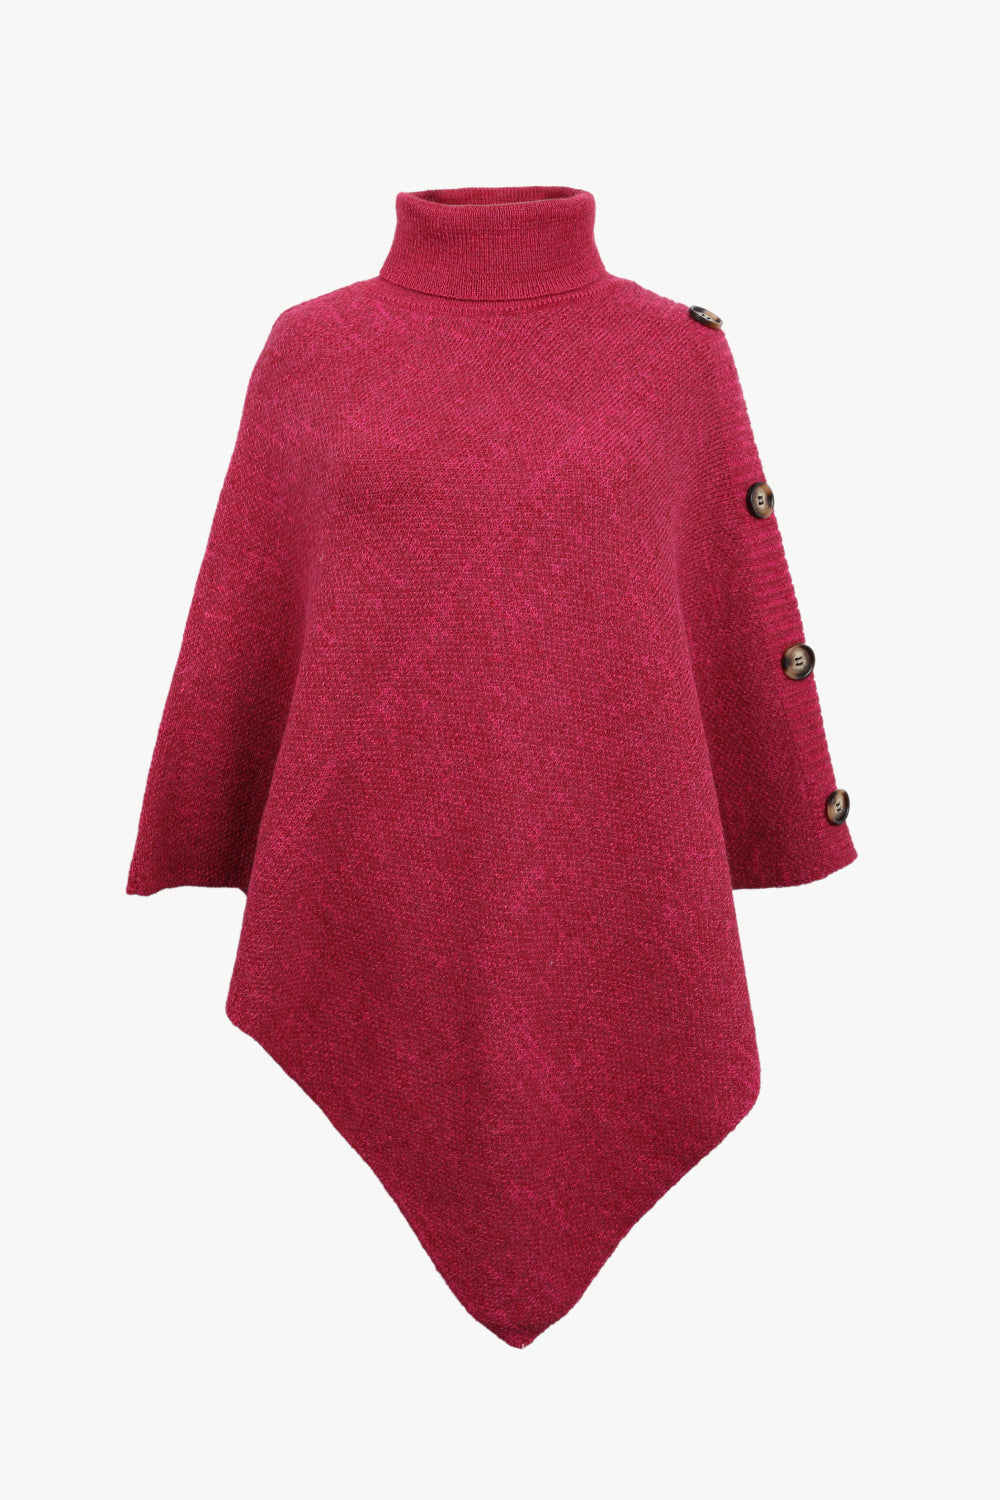 Turtleneck Buttoned Poncho Hot Pink One Size